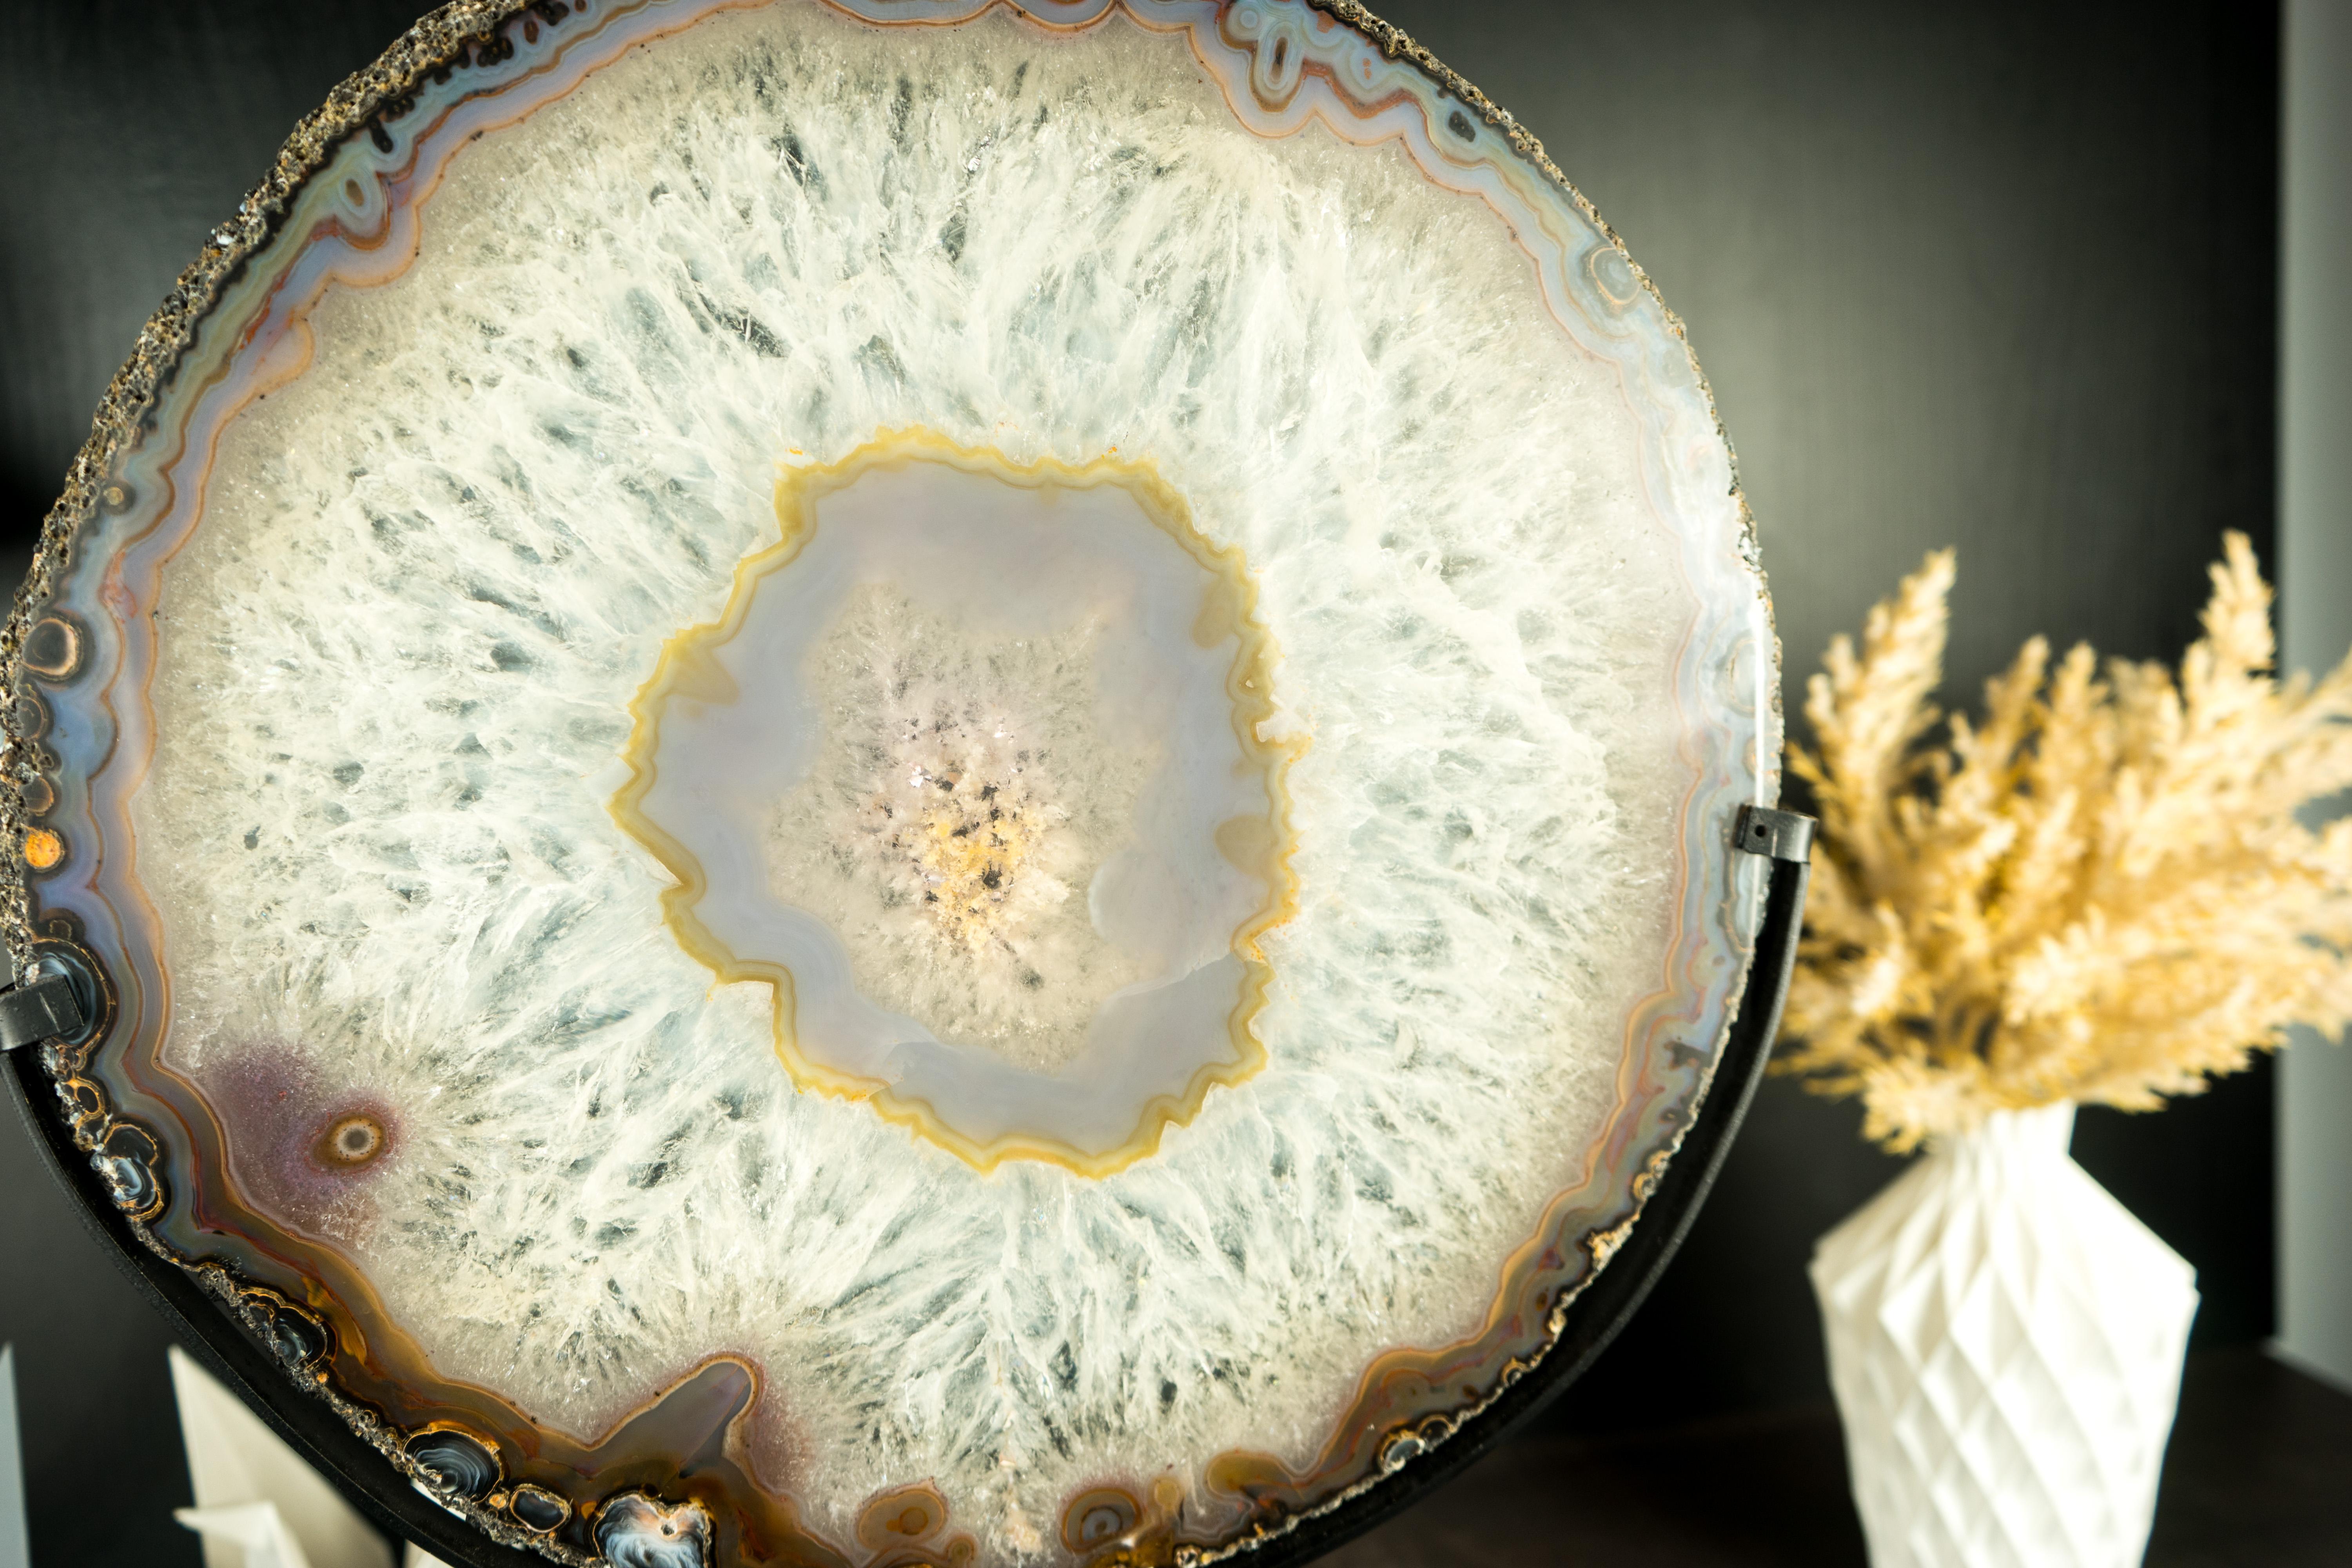 World-Class Large Lace Agate Slice, with Ice-Like Crystal and Lace Agate Frame For Sale 2